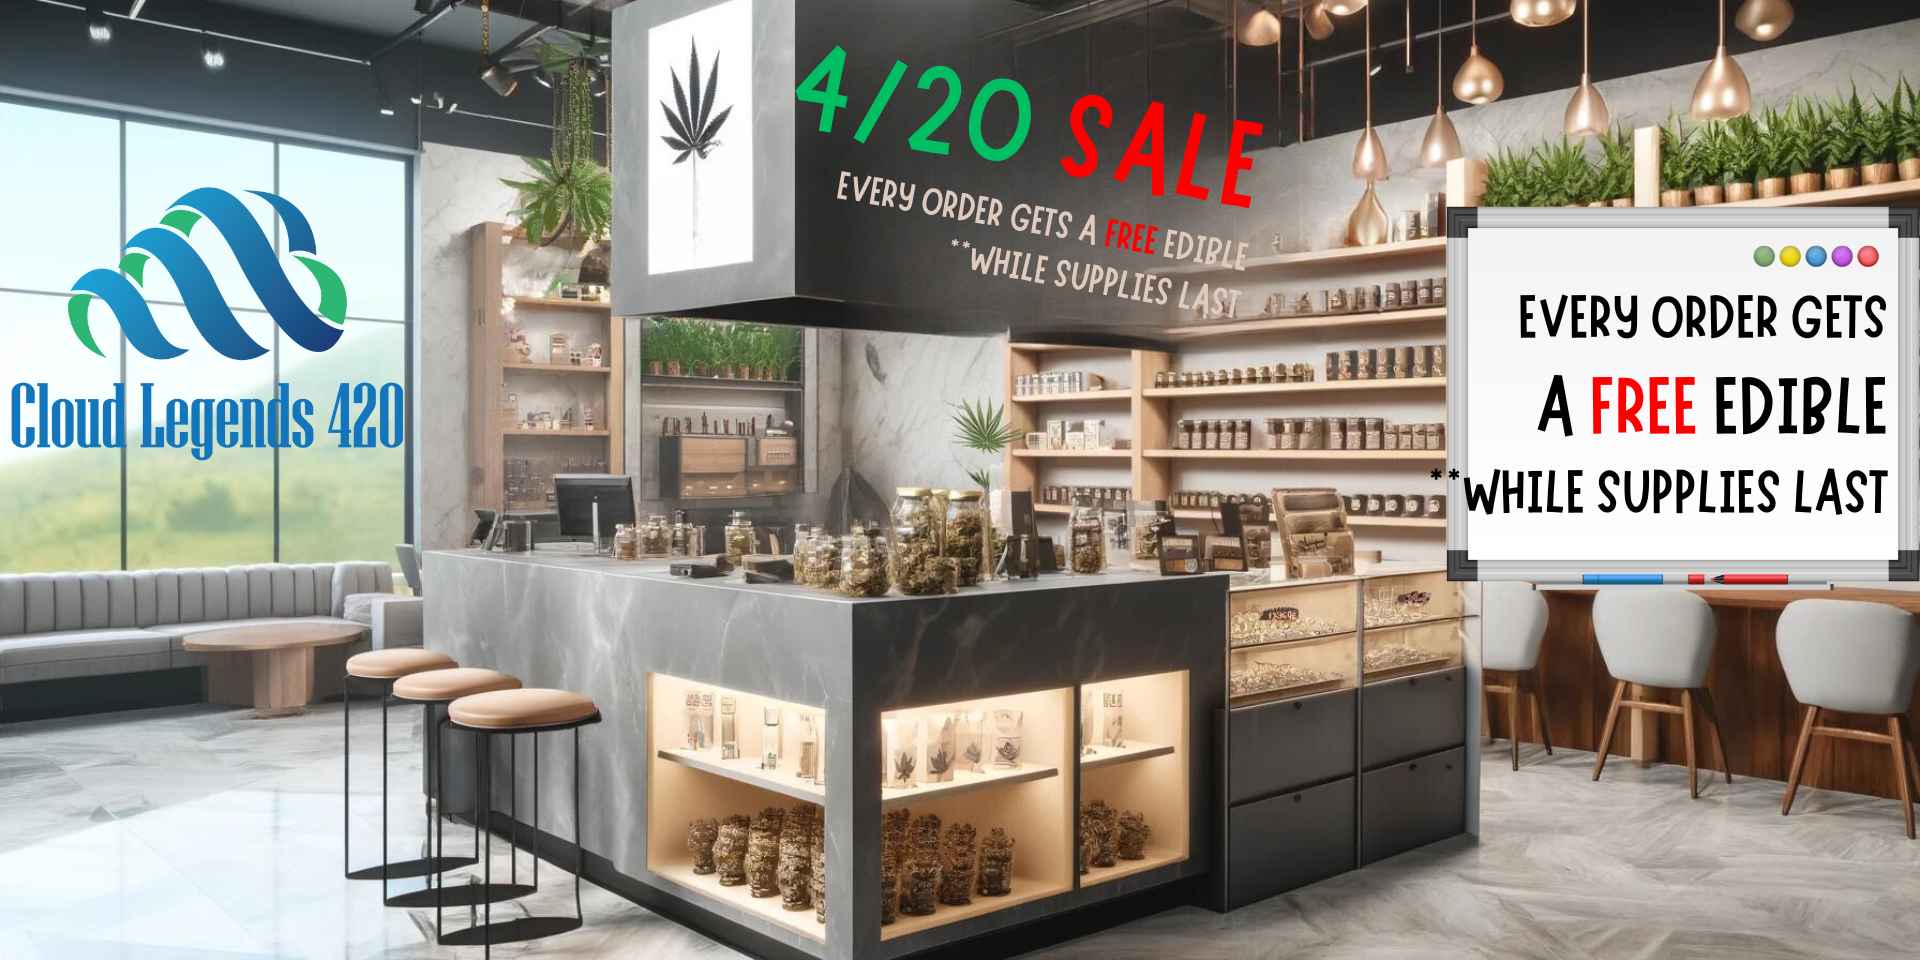 4/20 w/ free edible Banner by Cloud Legends 420